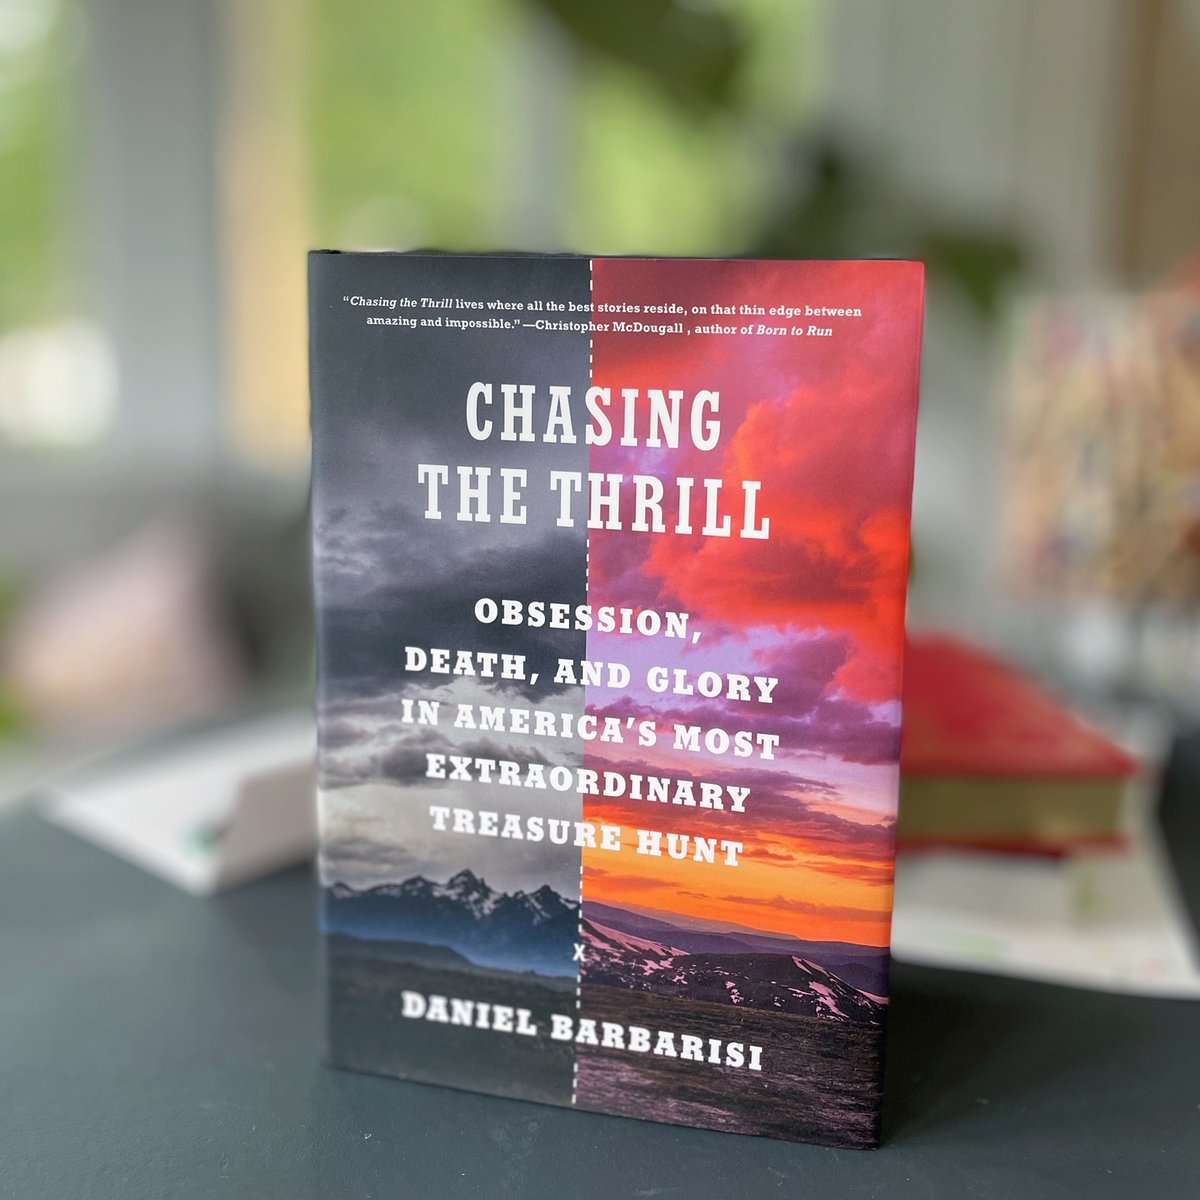 A copy of Chasing the Thrill by Daniel Barbarisi is standing faced out on a table with blurred out books and other items in the background.